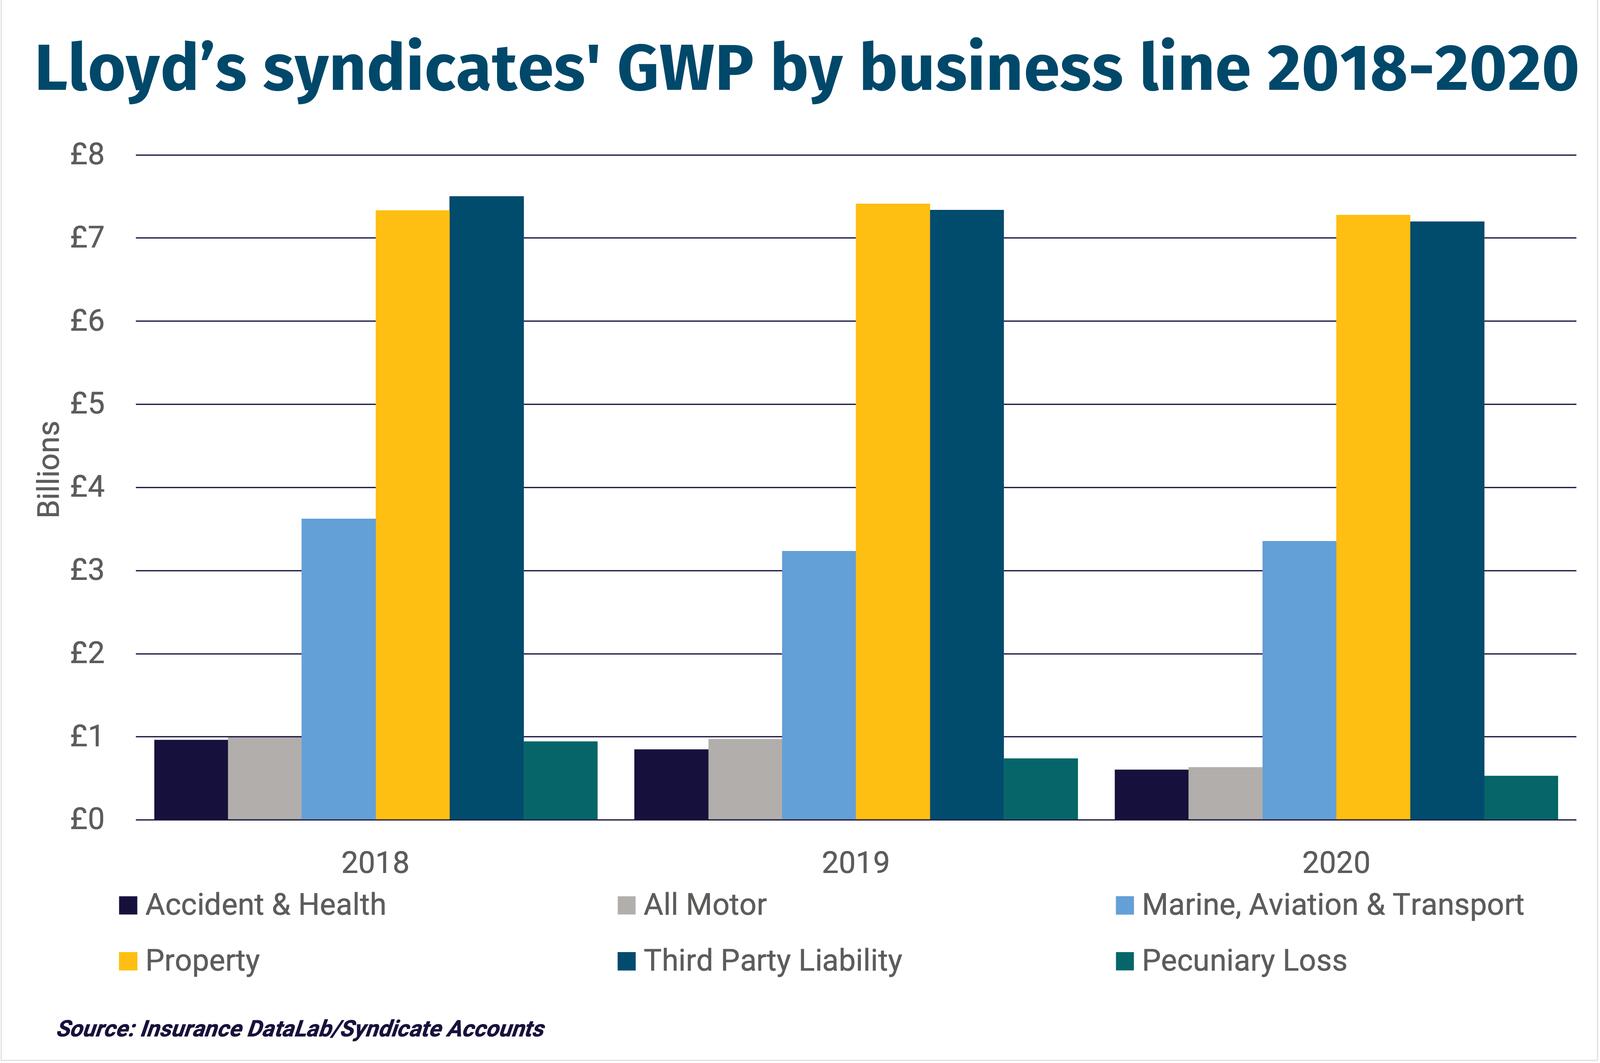 Lloyd’s syndicates' GWP by business line 2018-2020